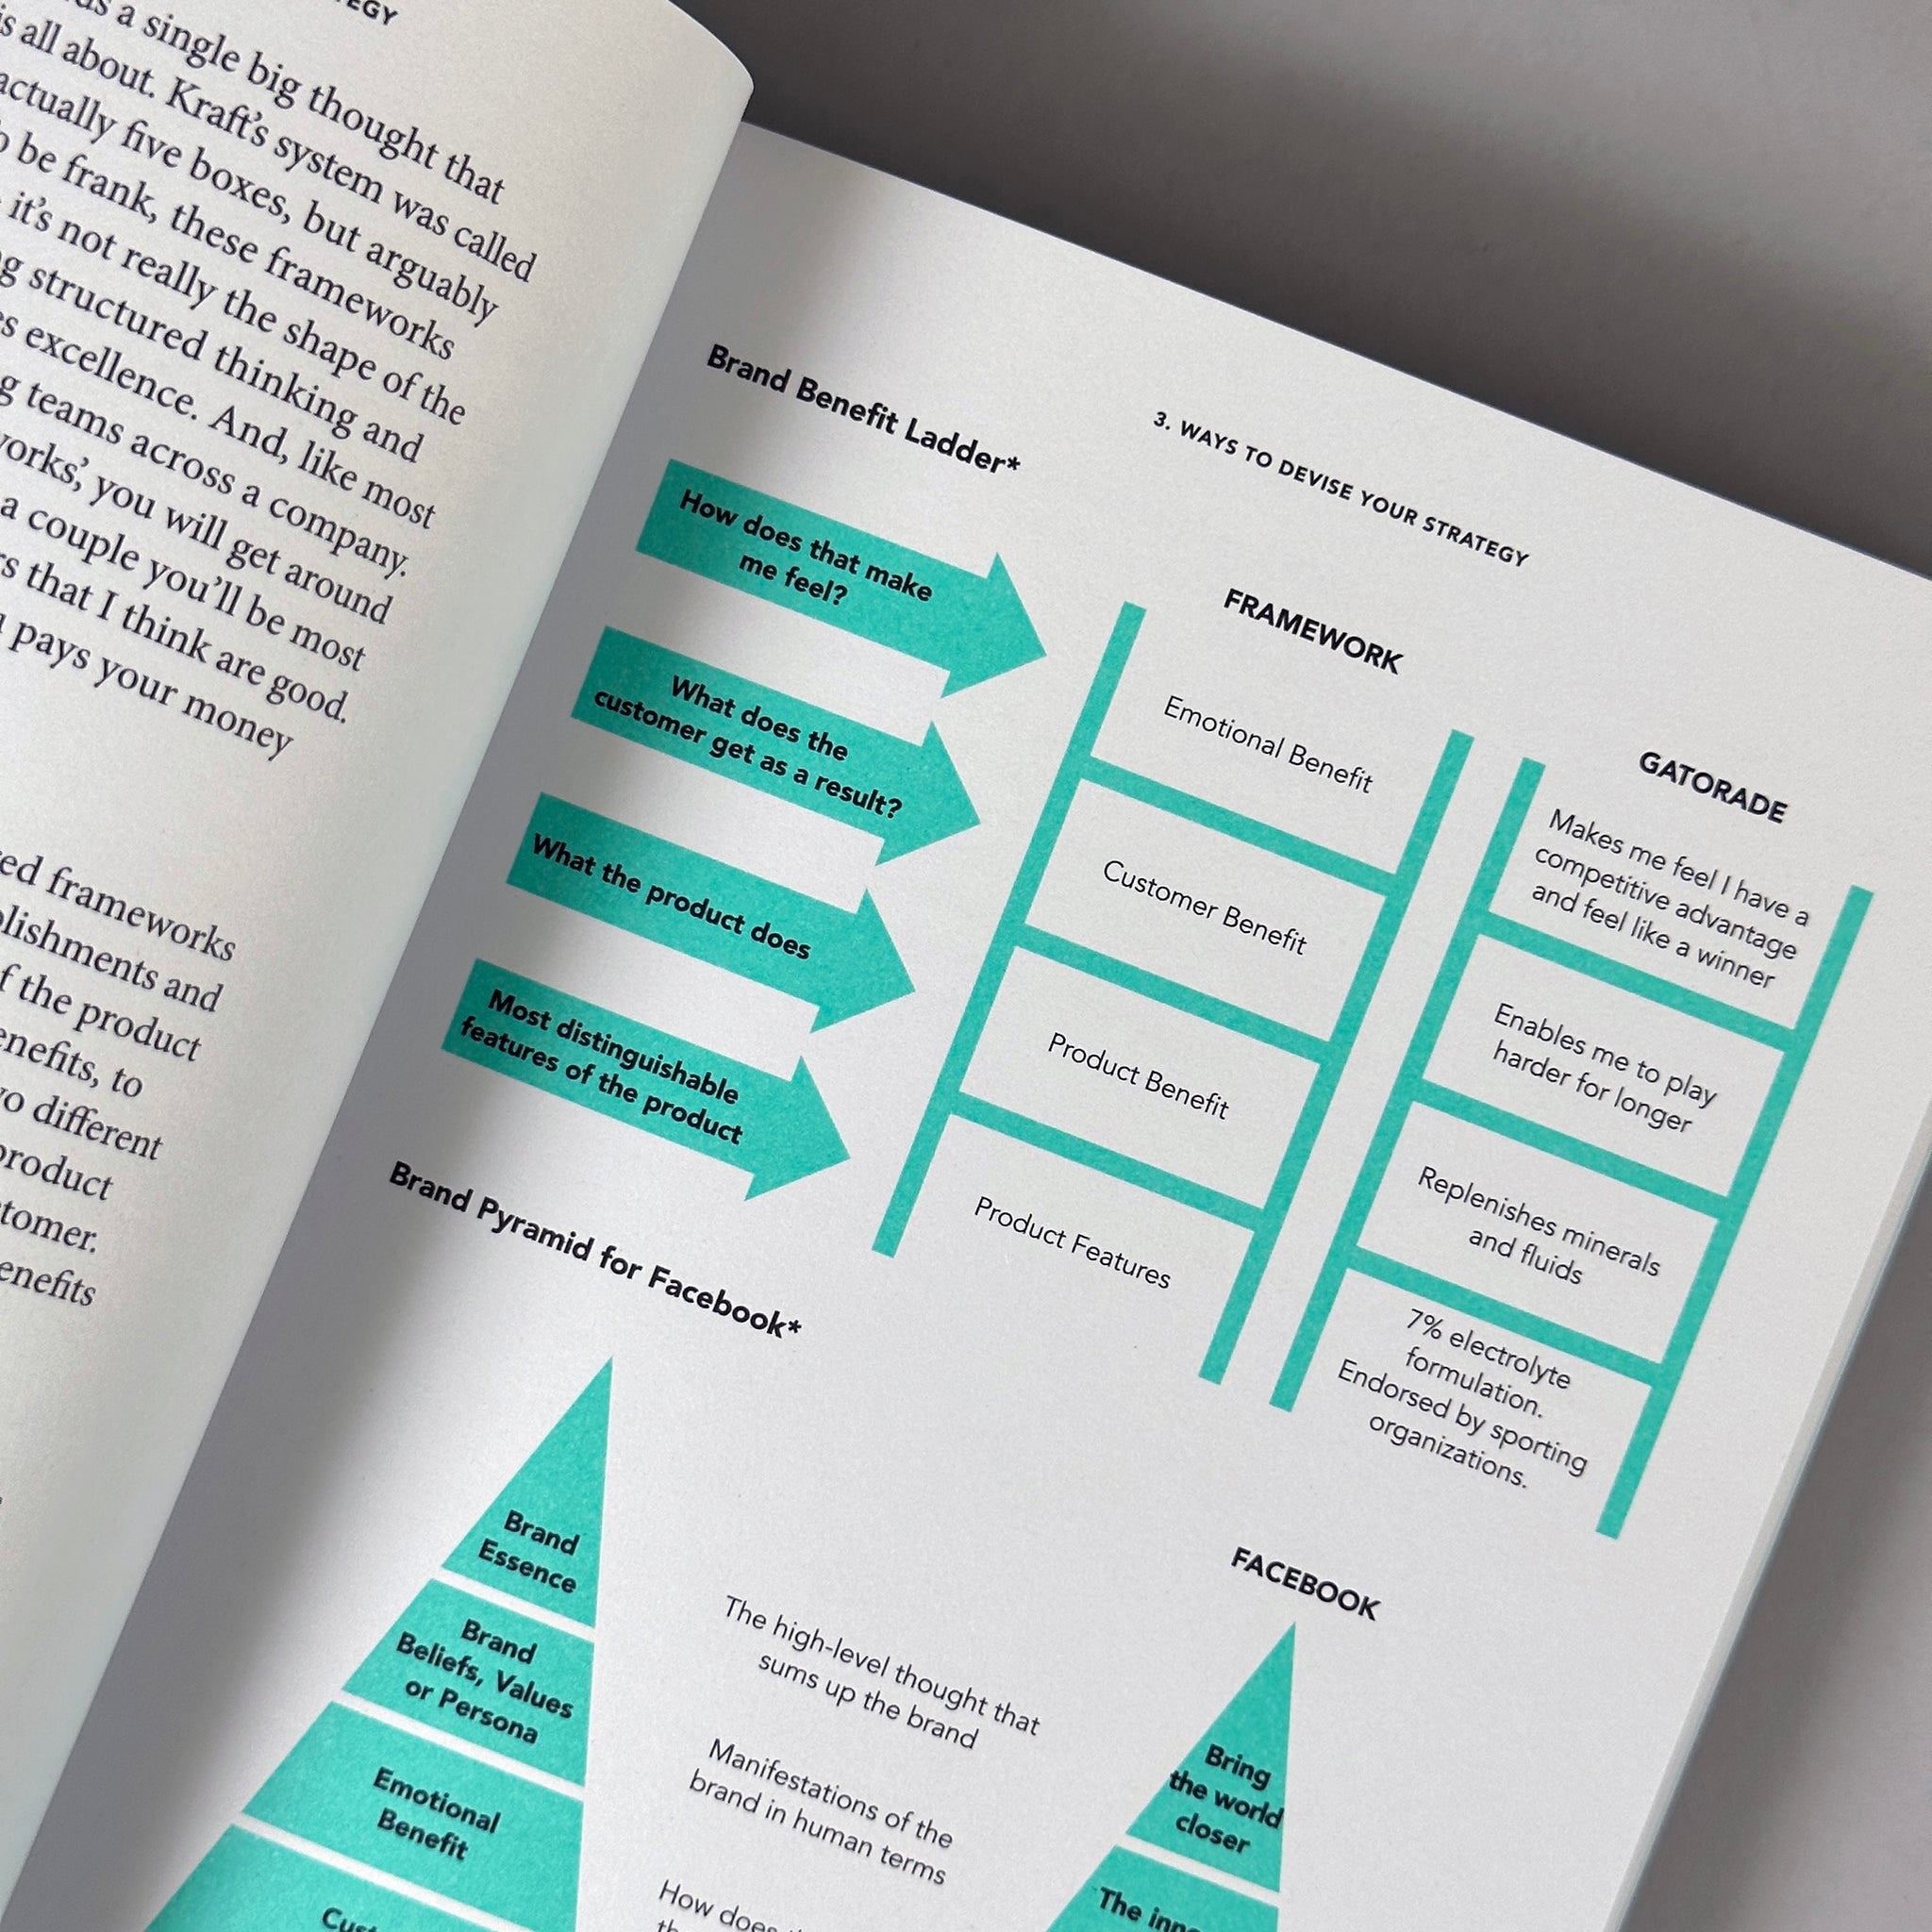 The Brand Book: An Insider’s Guide to Brand Building for Businesses and Organizations